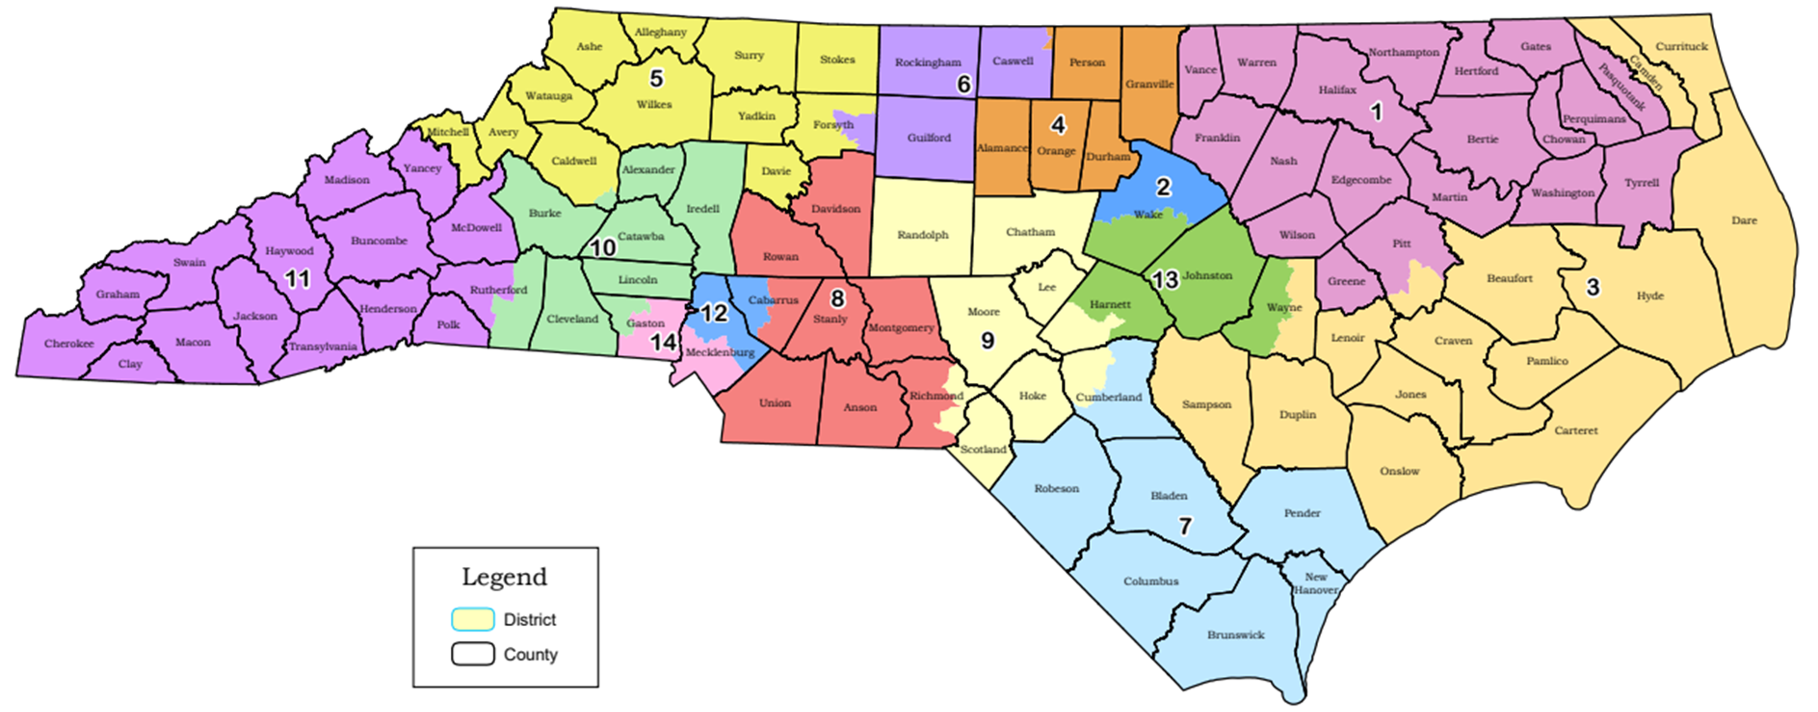 NC Congressional map for 118th Congress